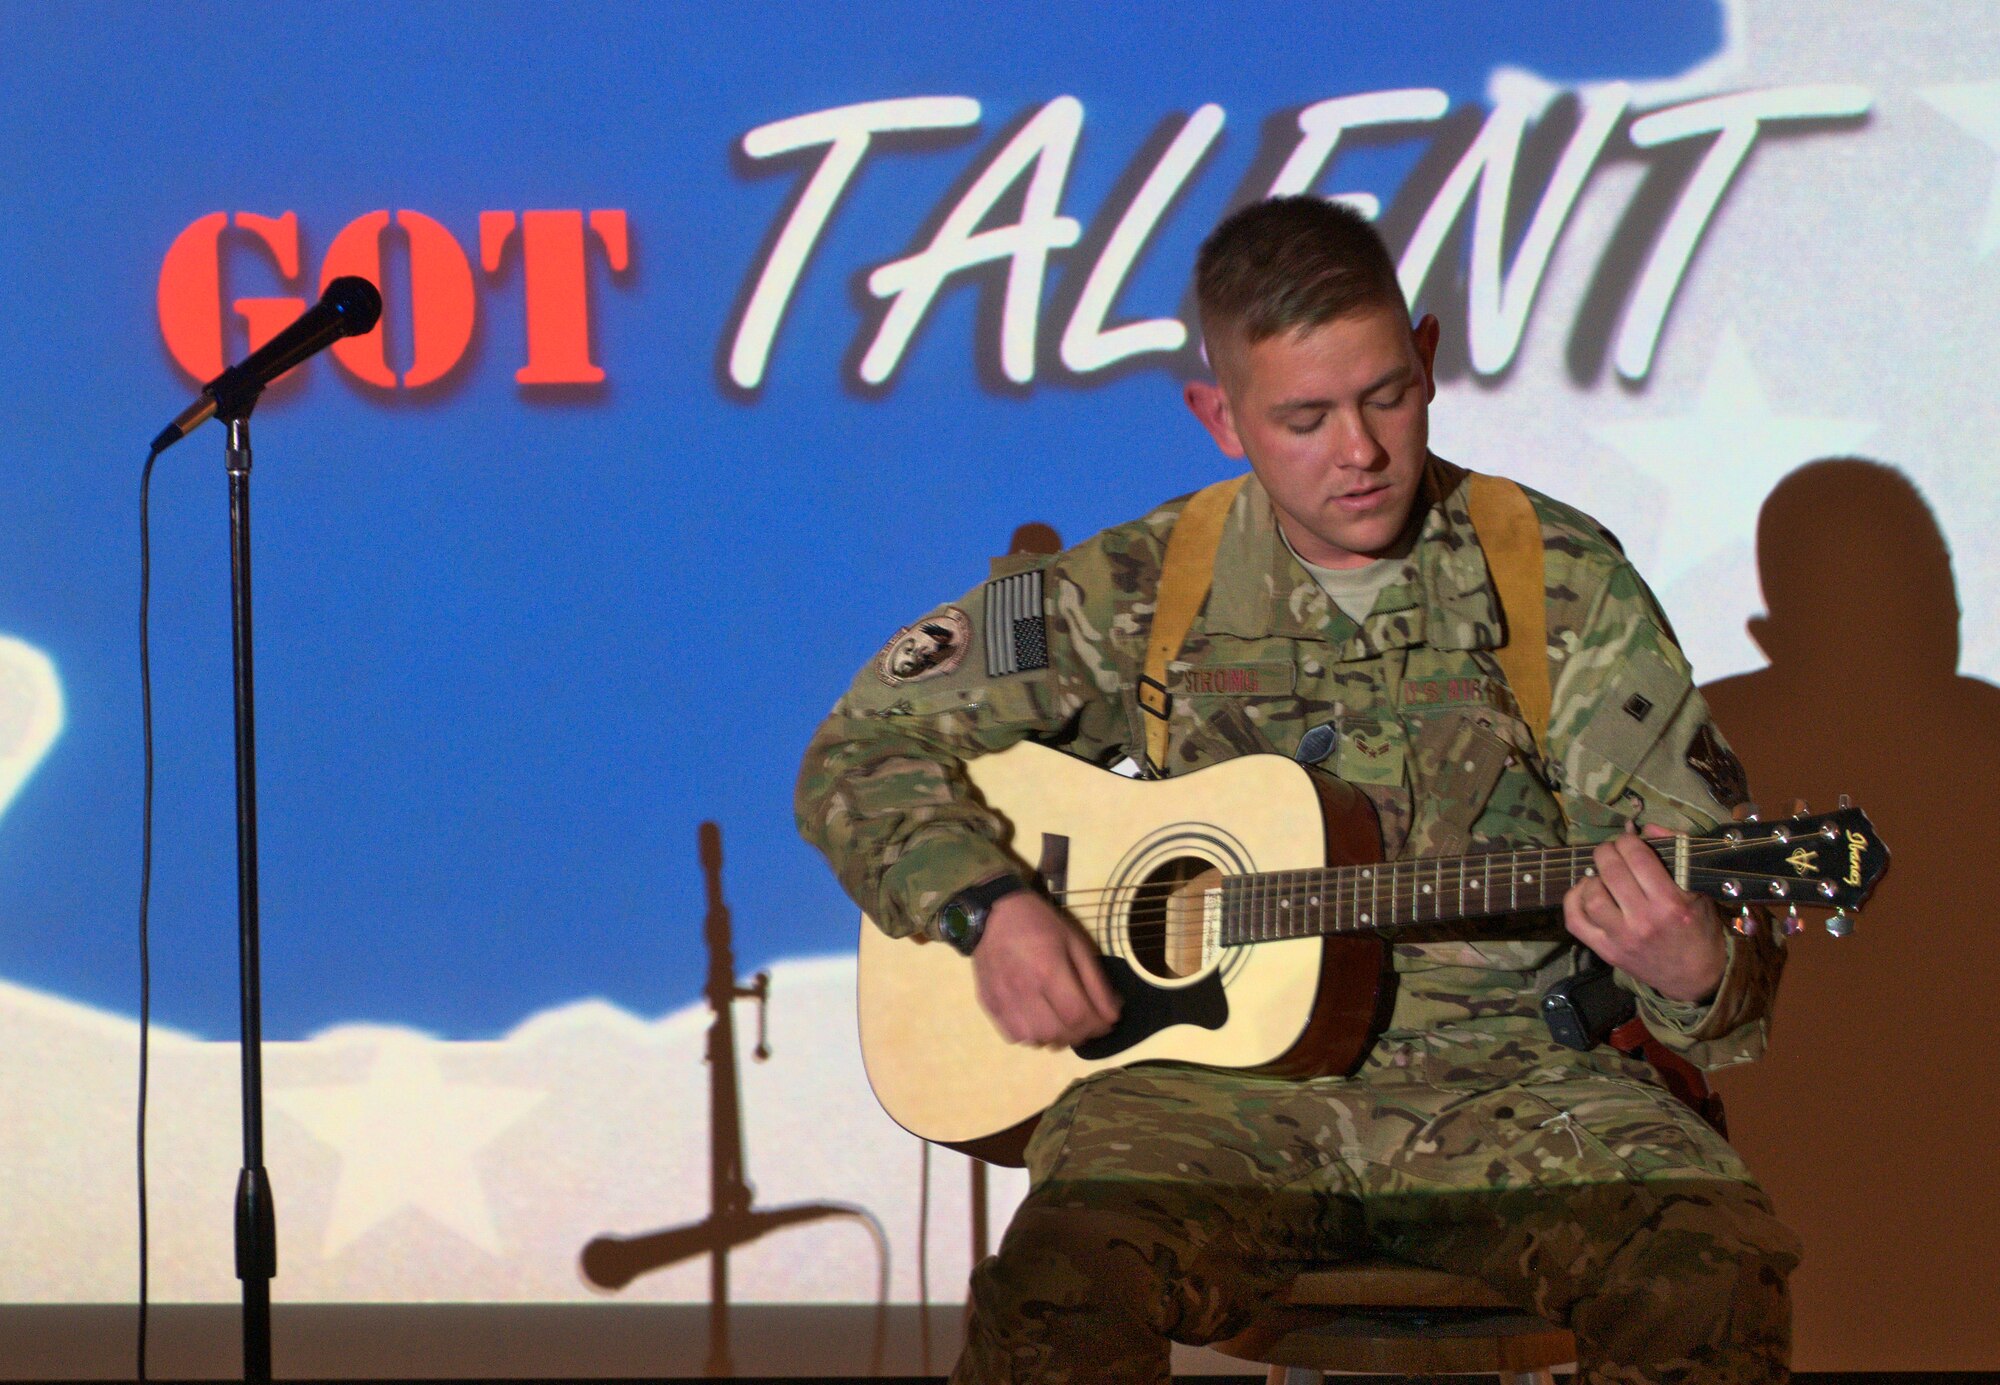 Airman First Class Jason Strong, 361st Expeditionary Reconnaissance Squadron, performs a song he wrote for the Kandahar’s Got Talent competition at Kandahar Air Field April 24. Strong, who has been at Kandahar for less than a week, placed second in the competition. (U.S. Air Force photo by Capt. Brian Maguire)